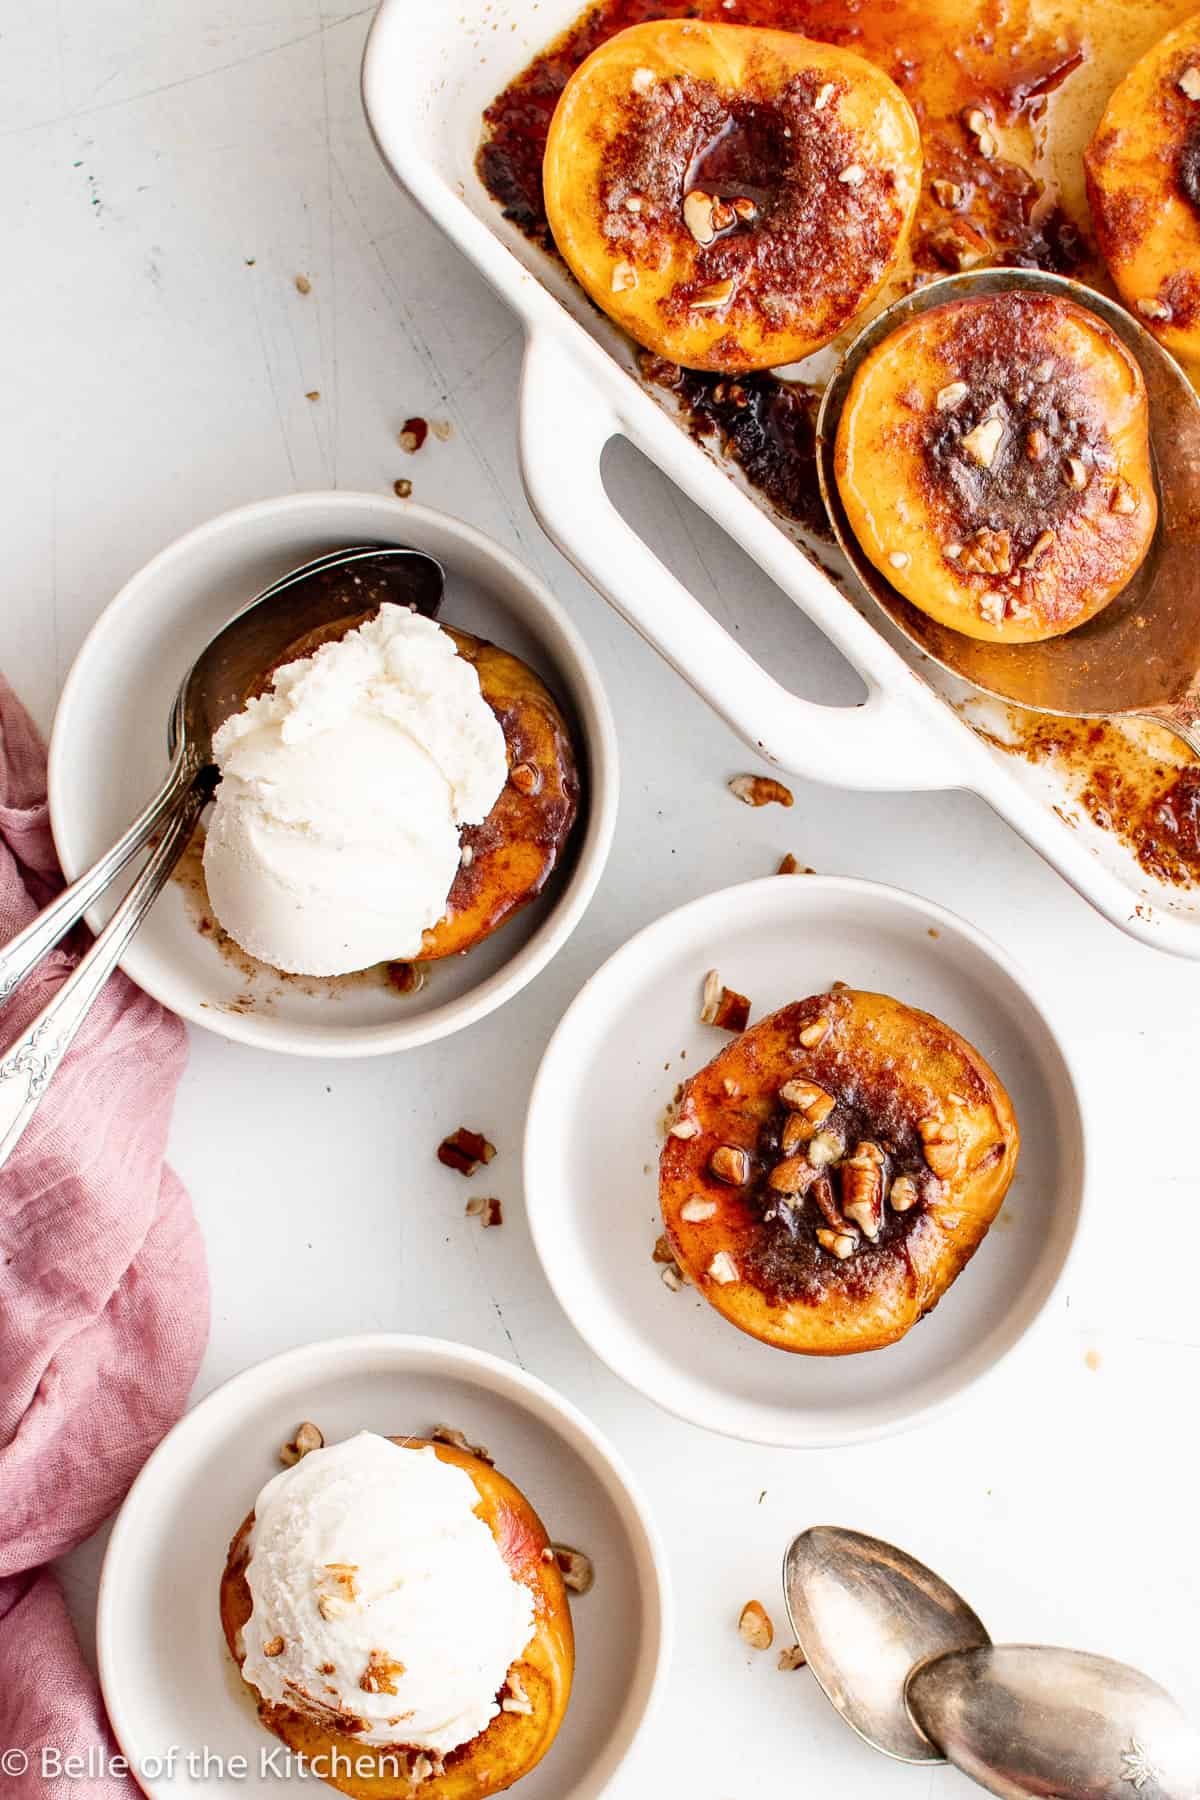 bowls of baked peaches next to a baking dish.